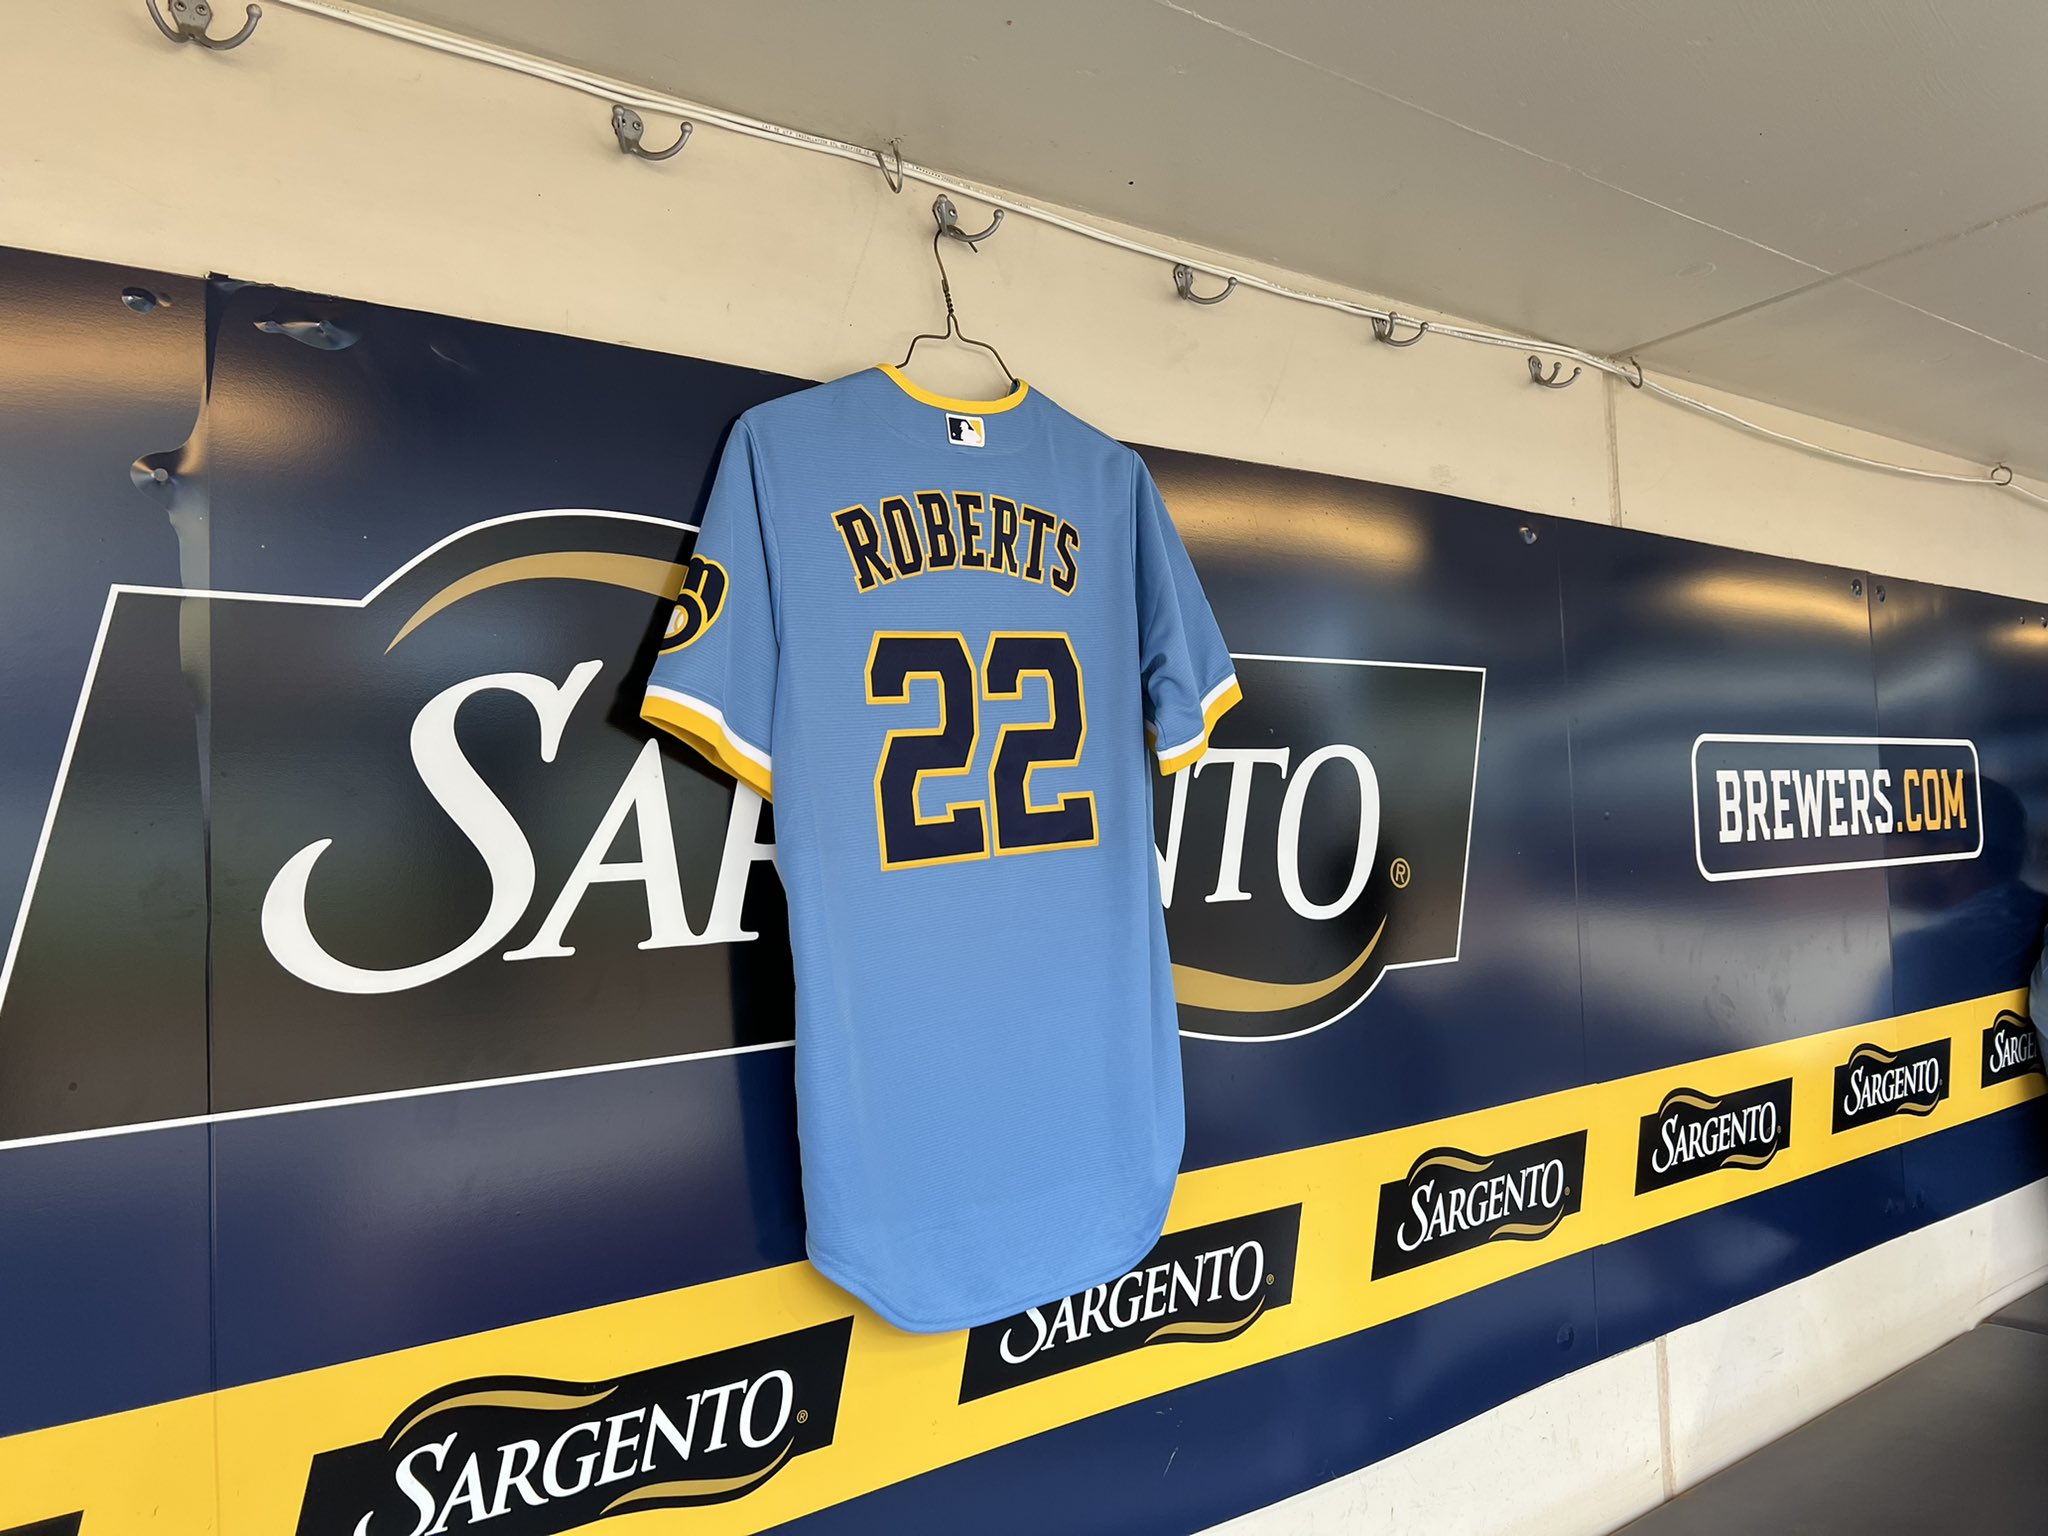 Adam McCalvy on X: This jersey in the dugout is for Cooper Roberts, the  8-year-old boy who was wounded in the Highland Park shooting on July 4 and  has been identified in